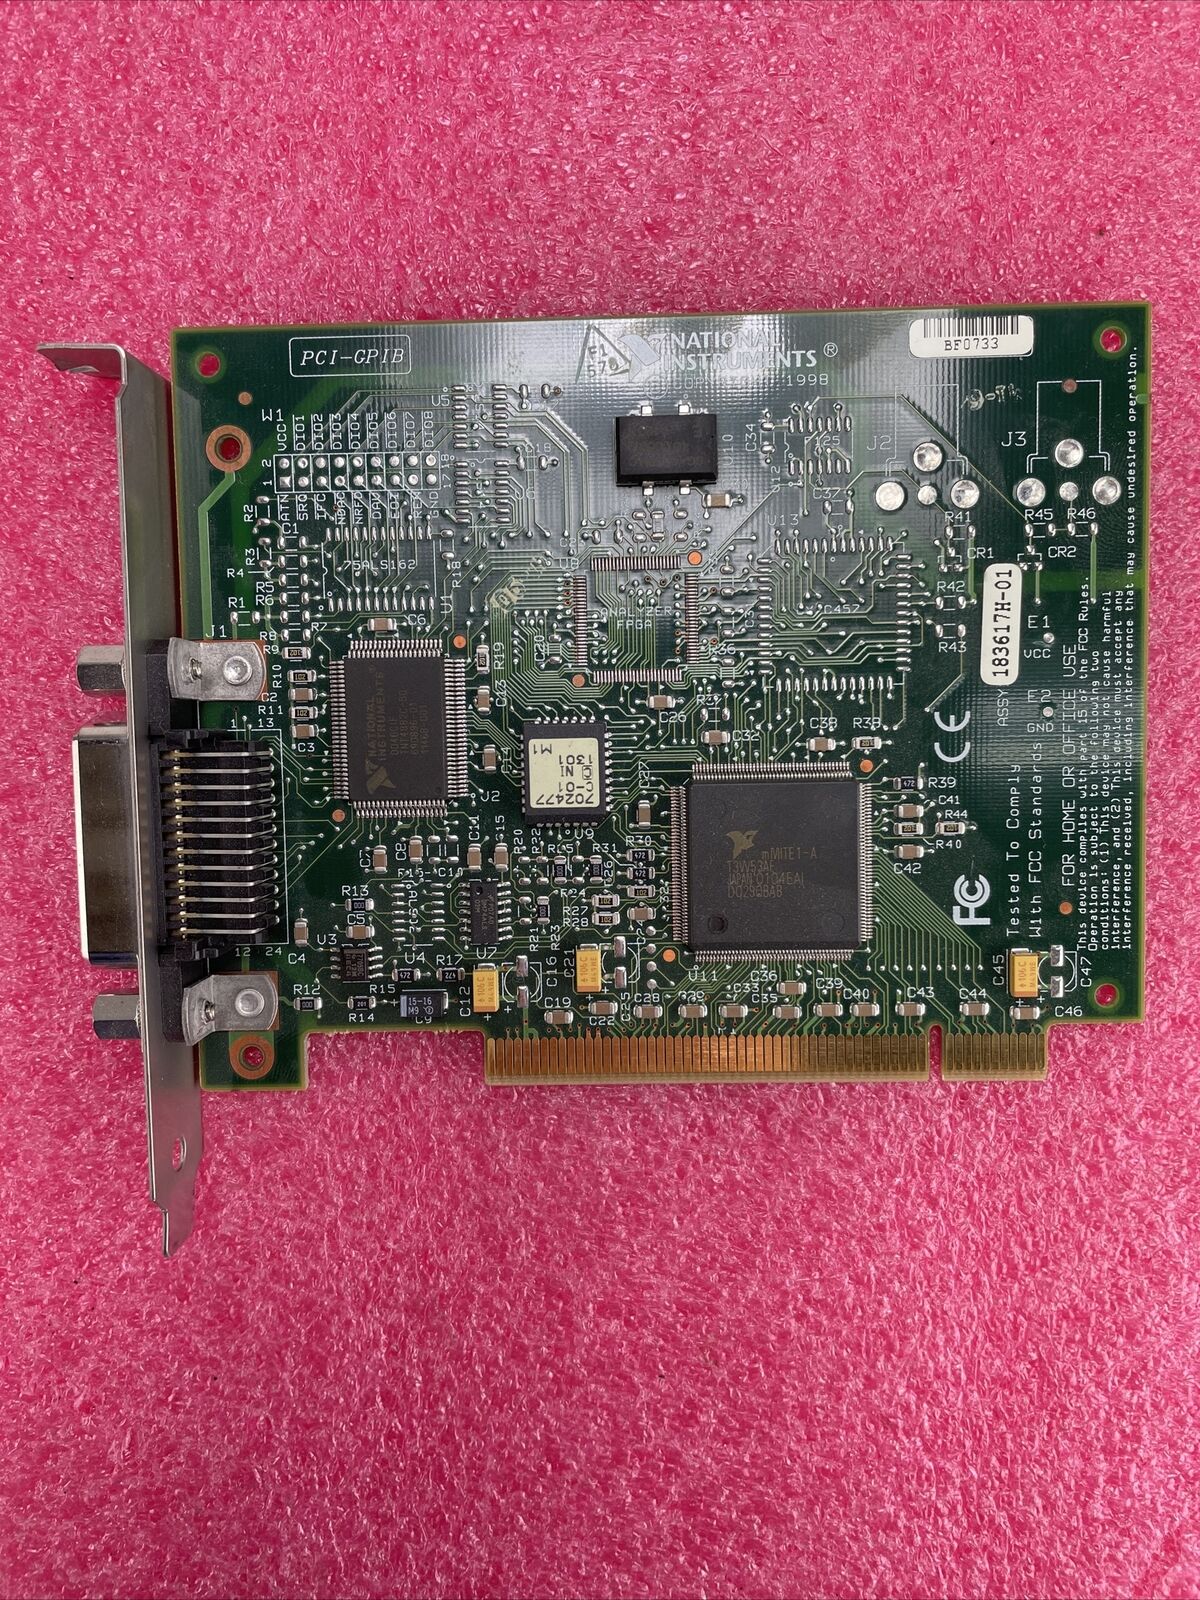 National Istruments PCI-GPIB BF0733 Controller Card